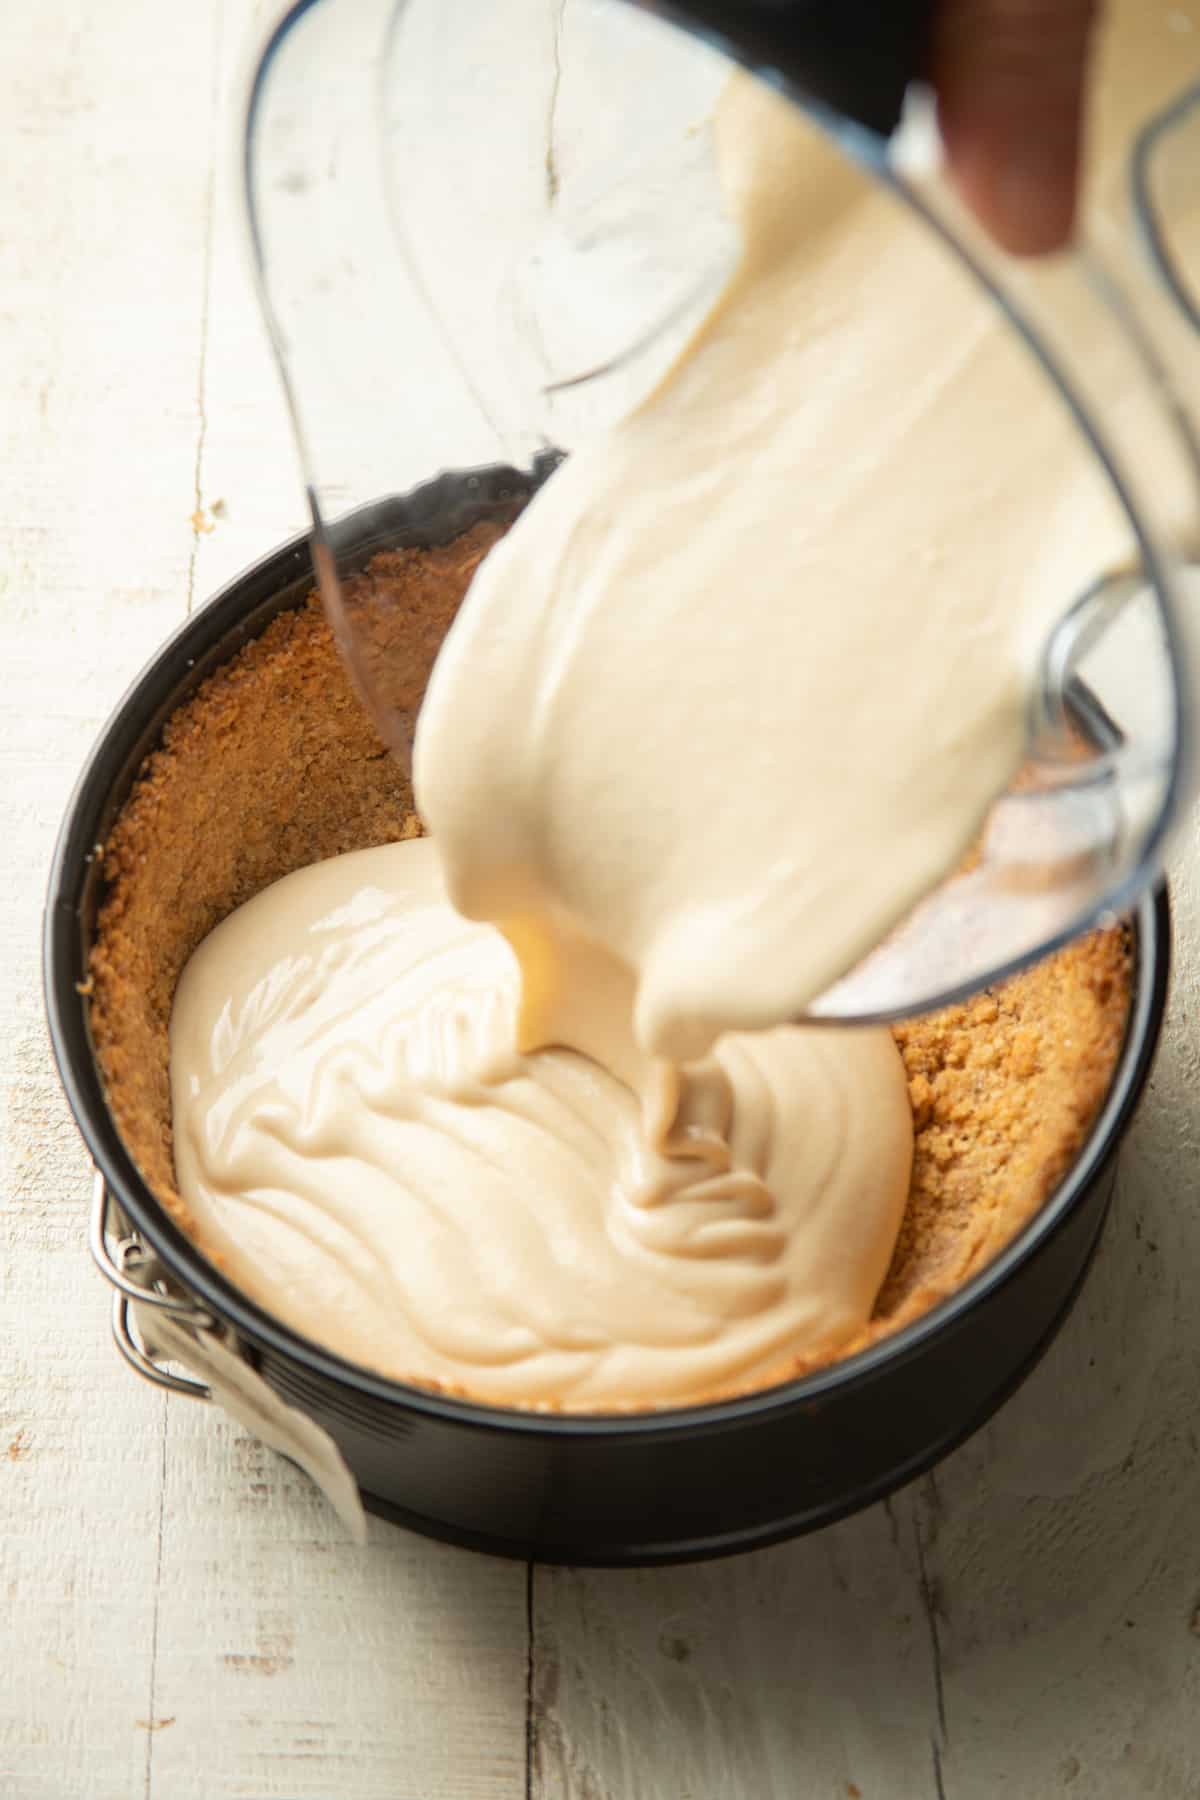 Vegan Cheesecake batter being poured from a blender into a crust.